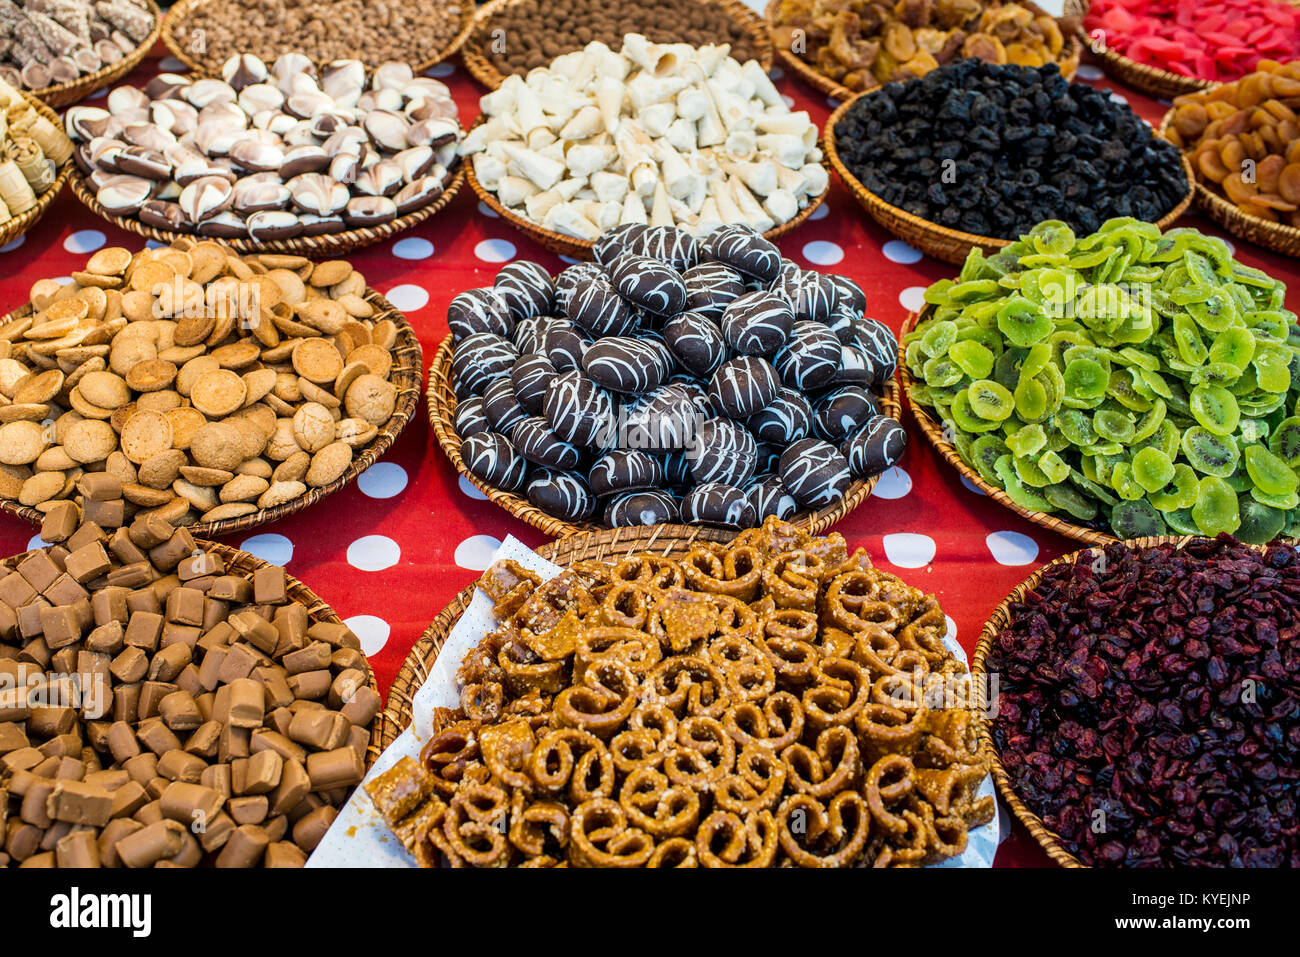 Colorful sweets in the open market Stock Photo